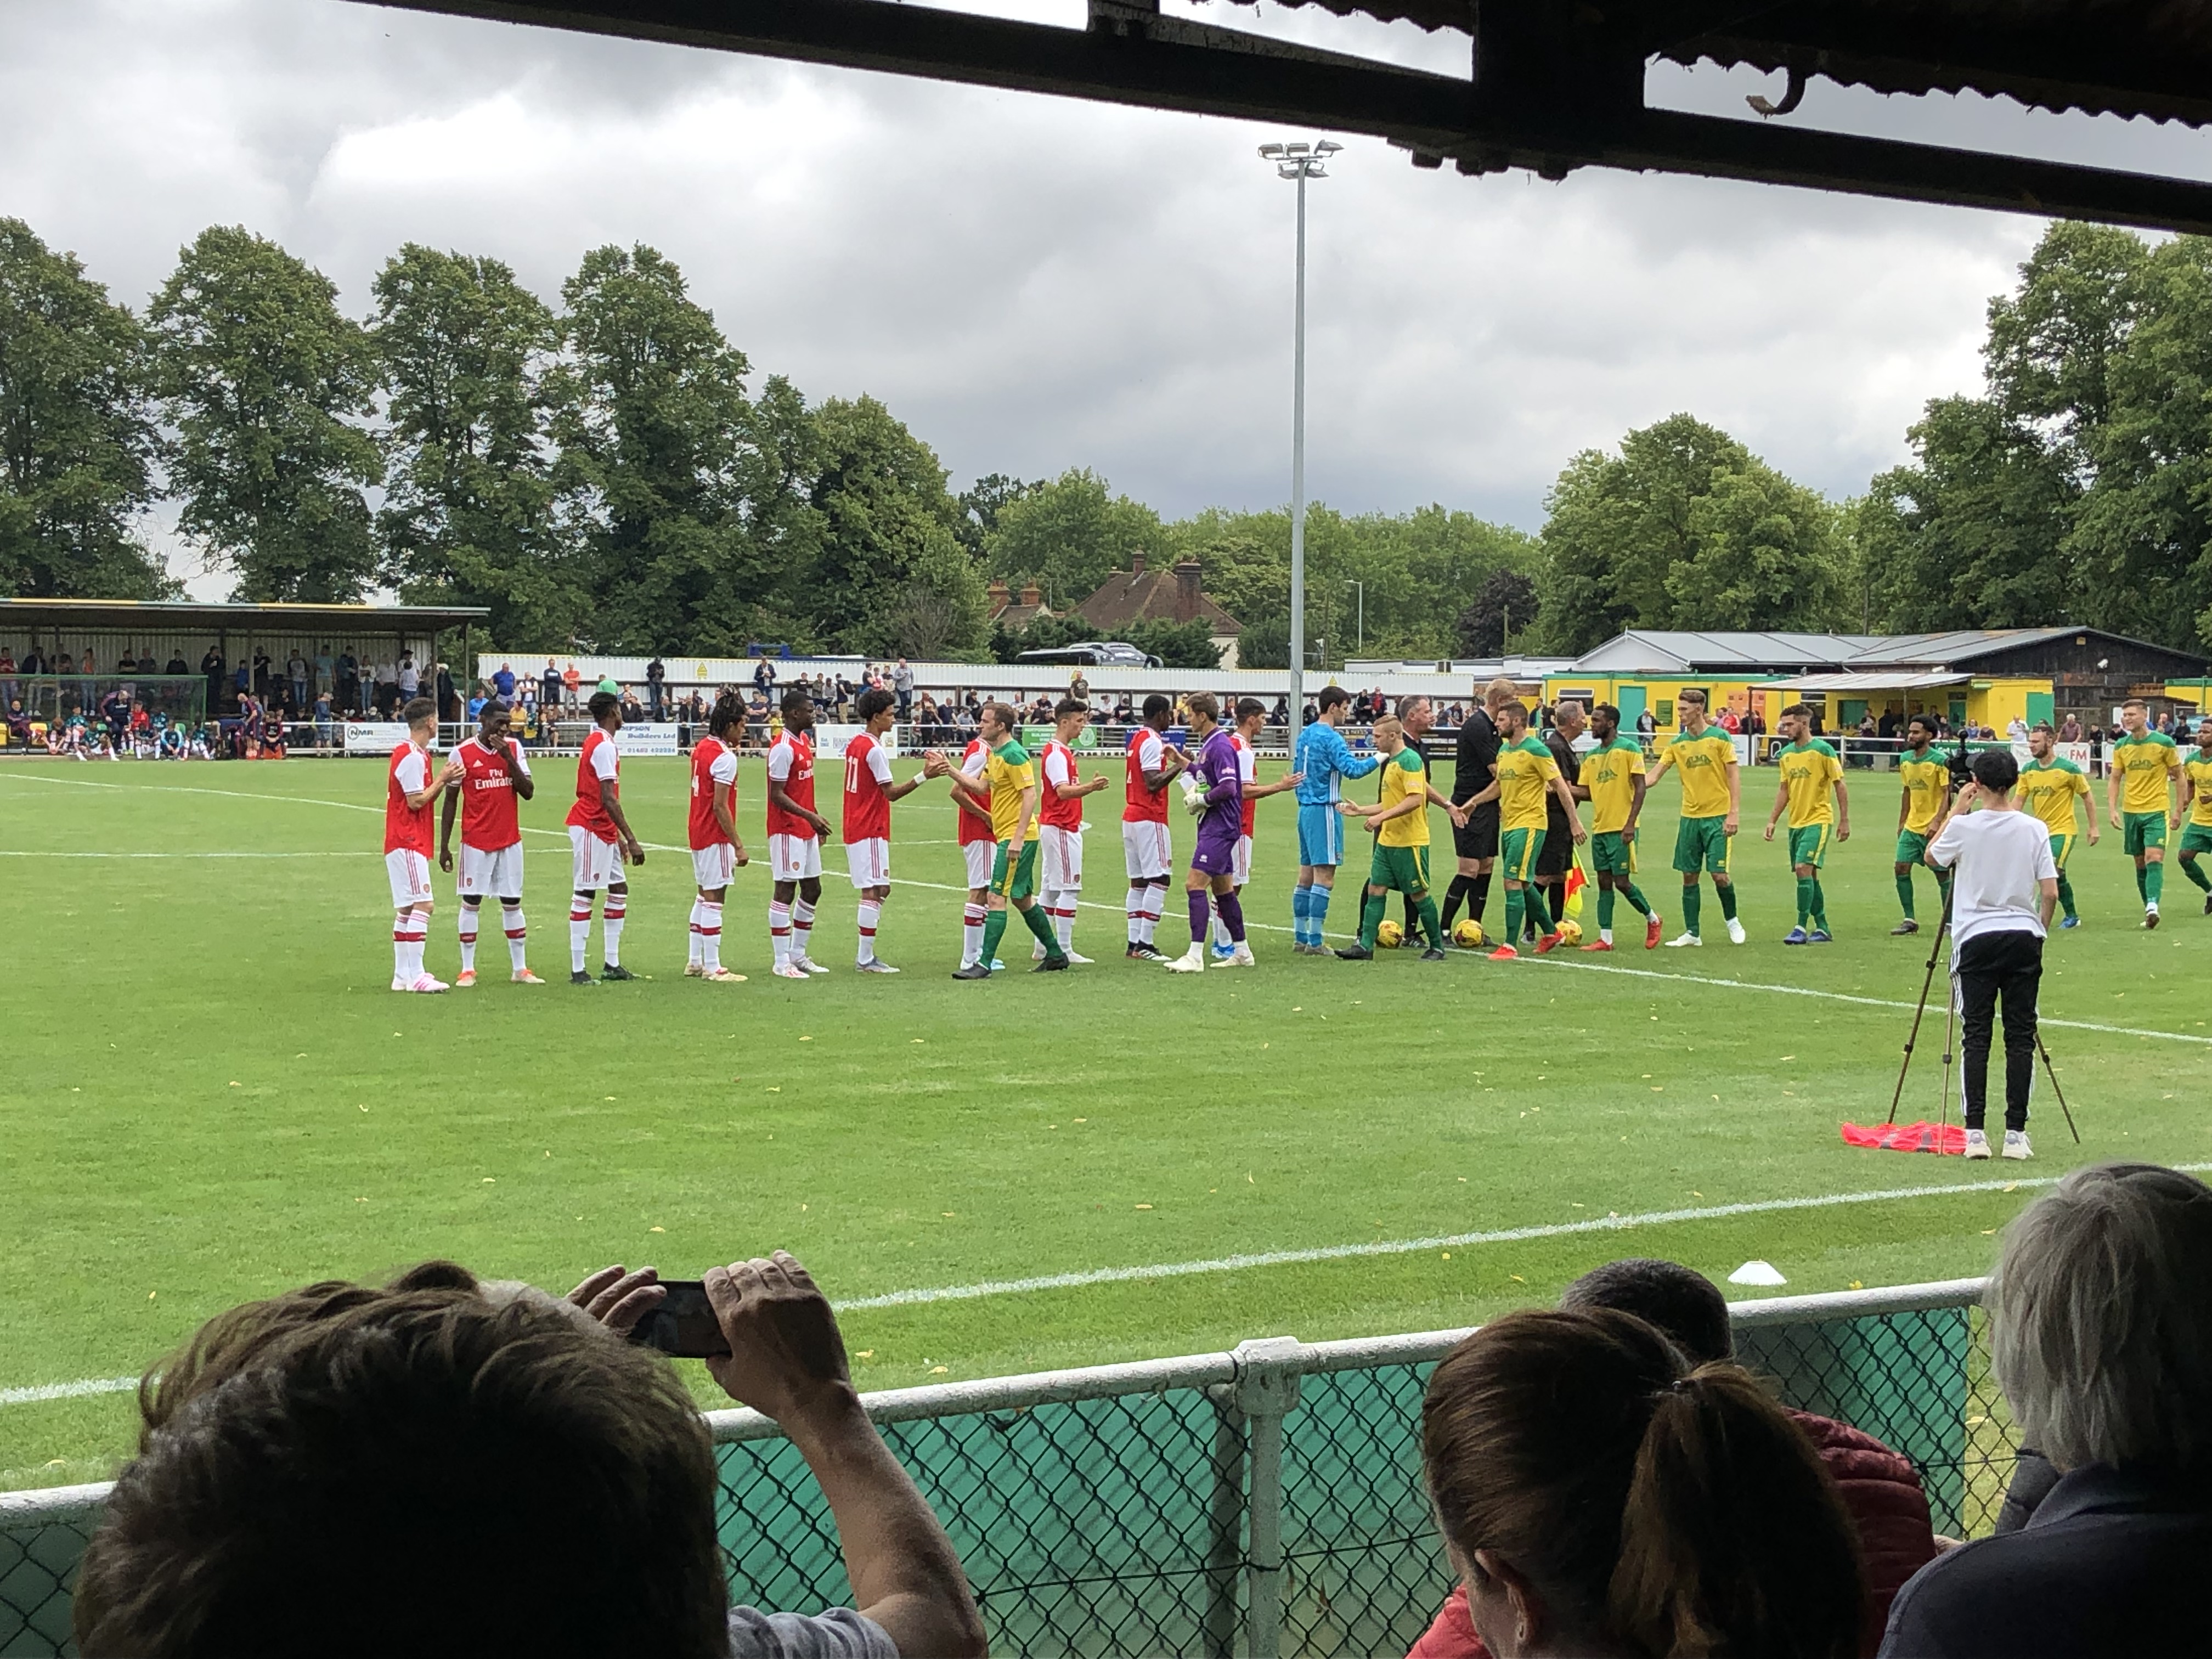 Arsenal u18s lining up against Hitchin Town [Photo Dan Critchlow/Daily Cannon]